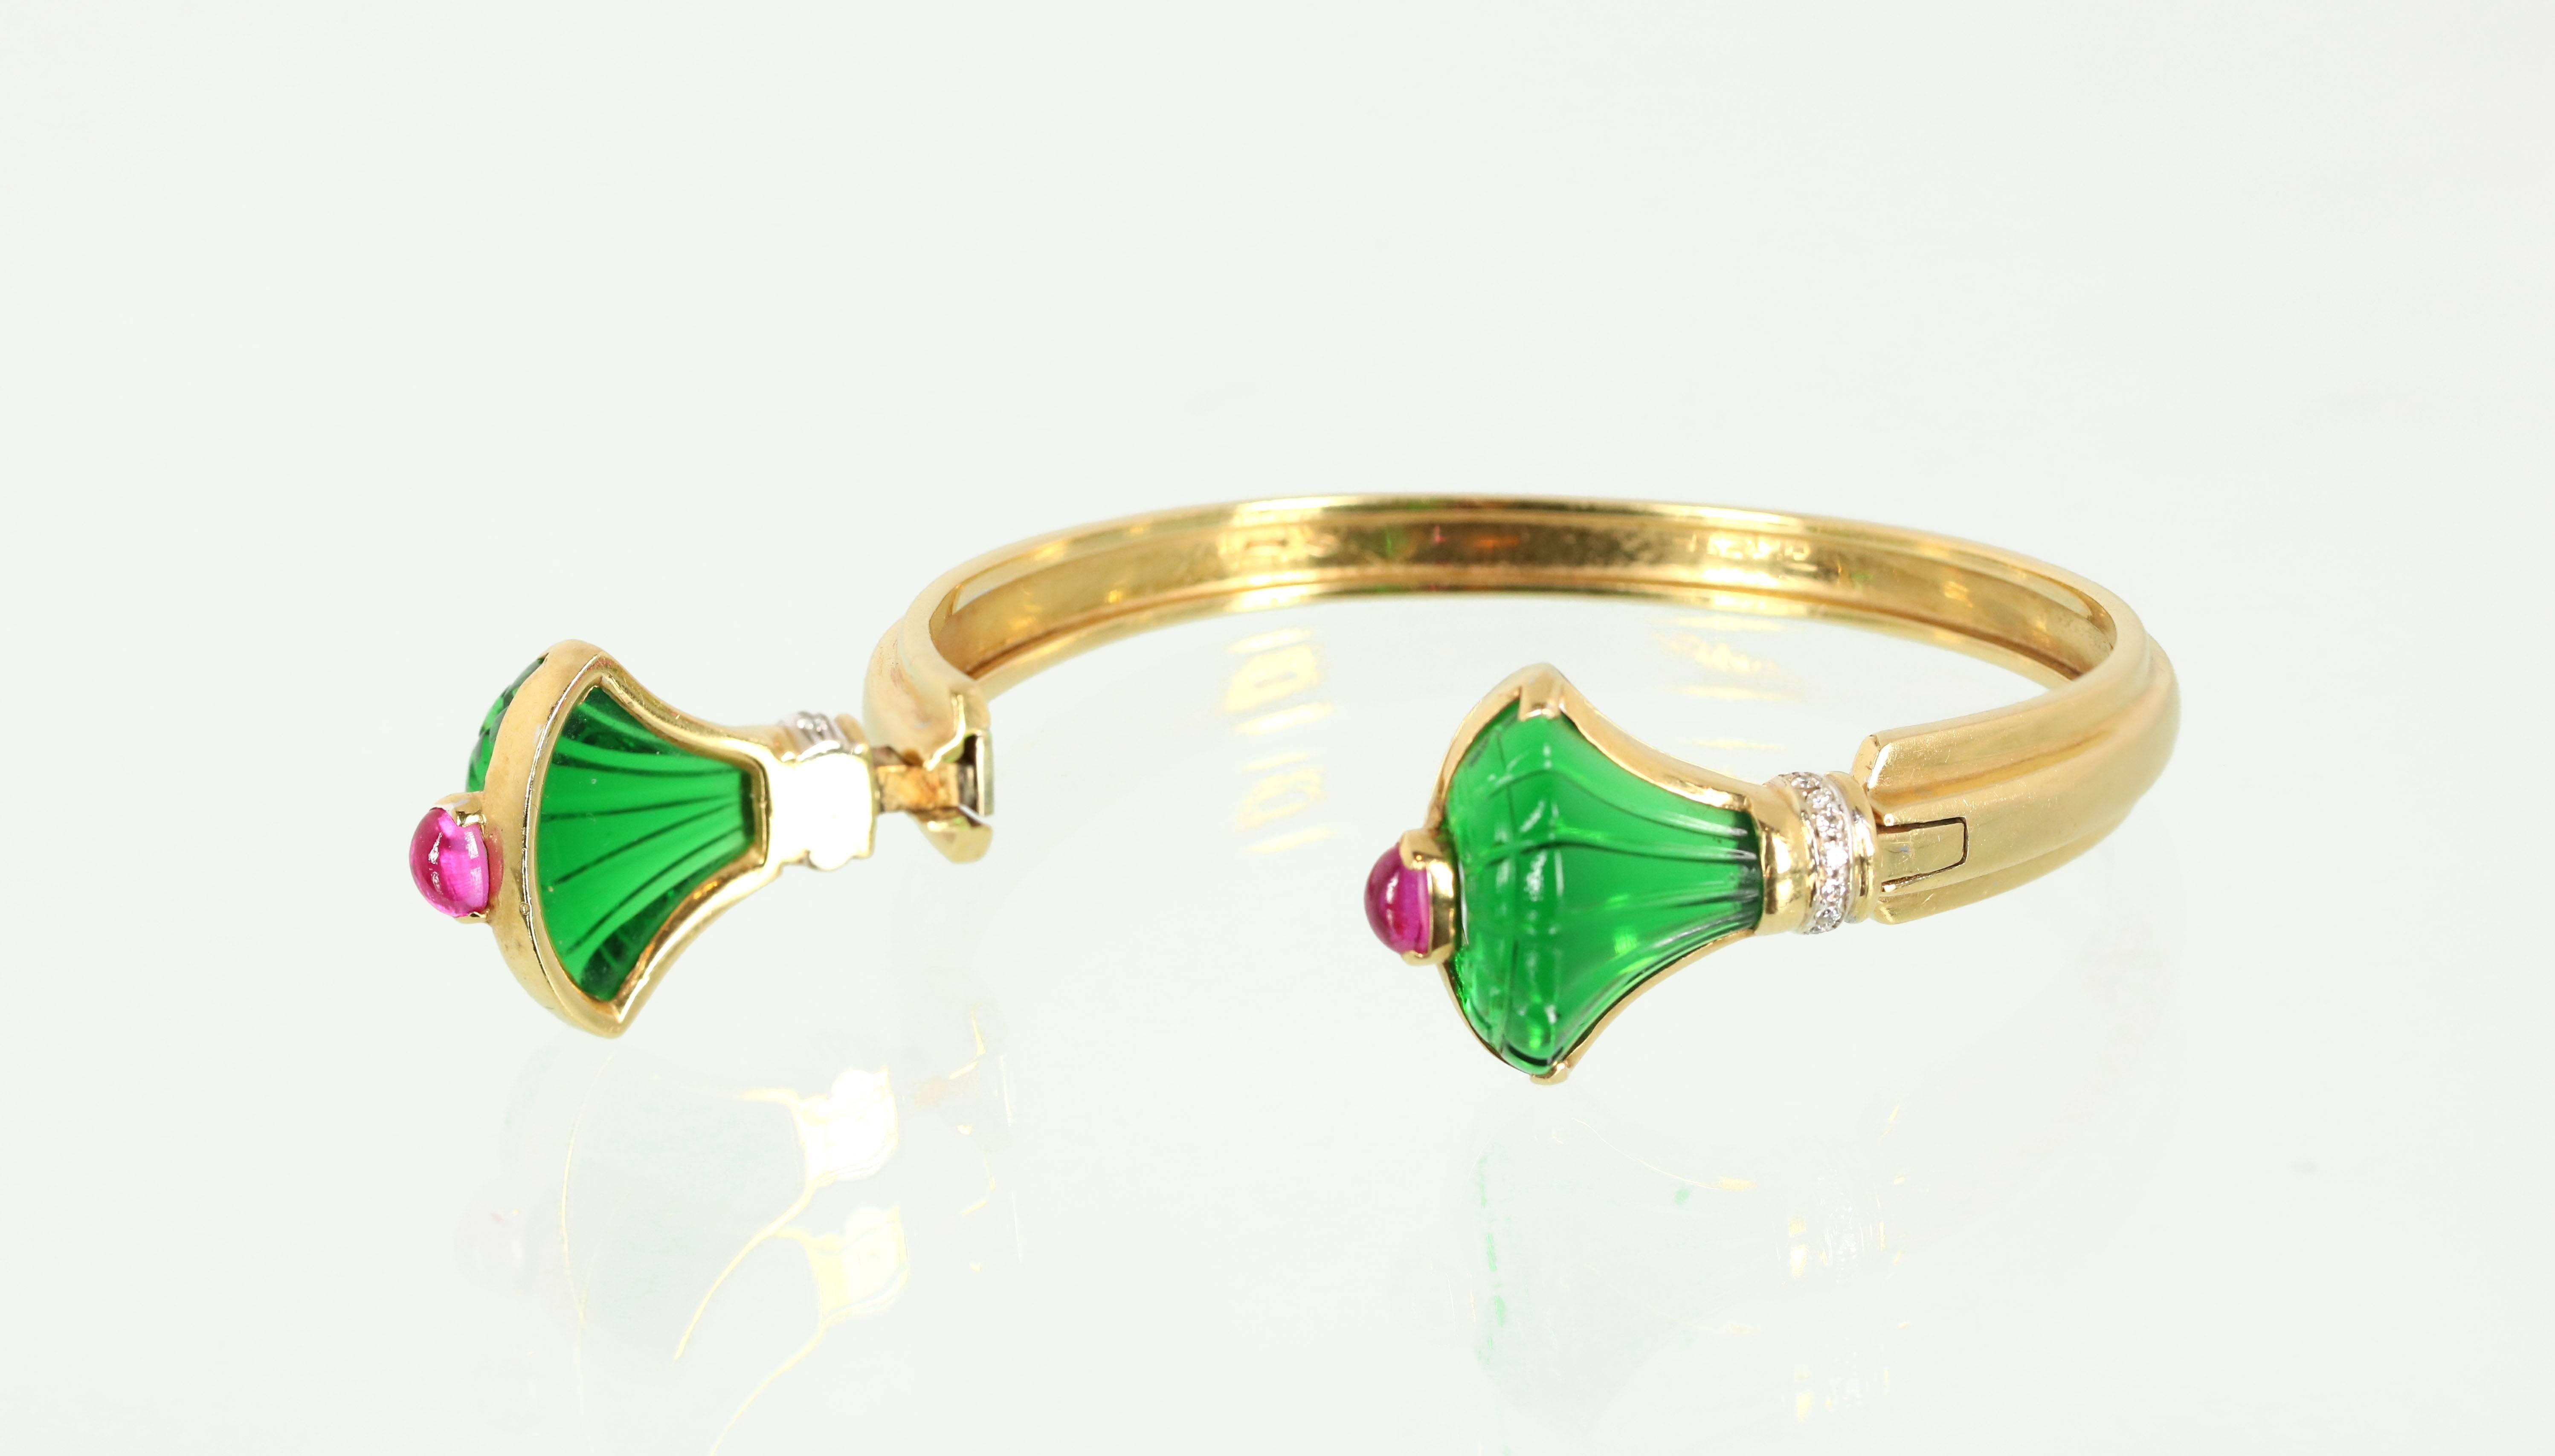 A very stylish emerald-color carved glass, ruby cabochon and diamond bangle bracelet. 18K yellow gold